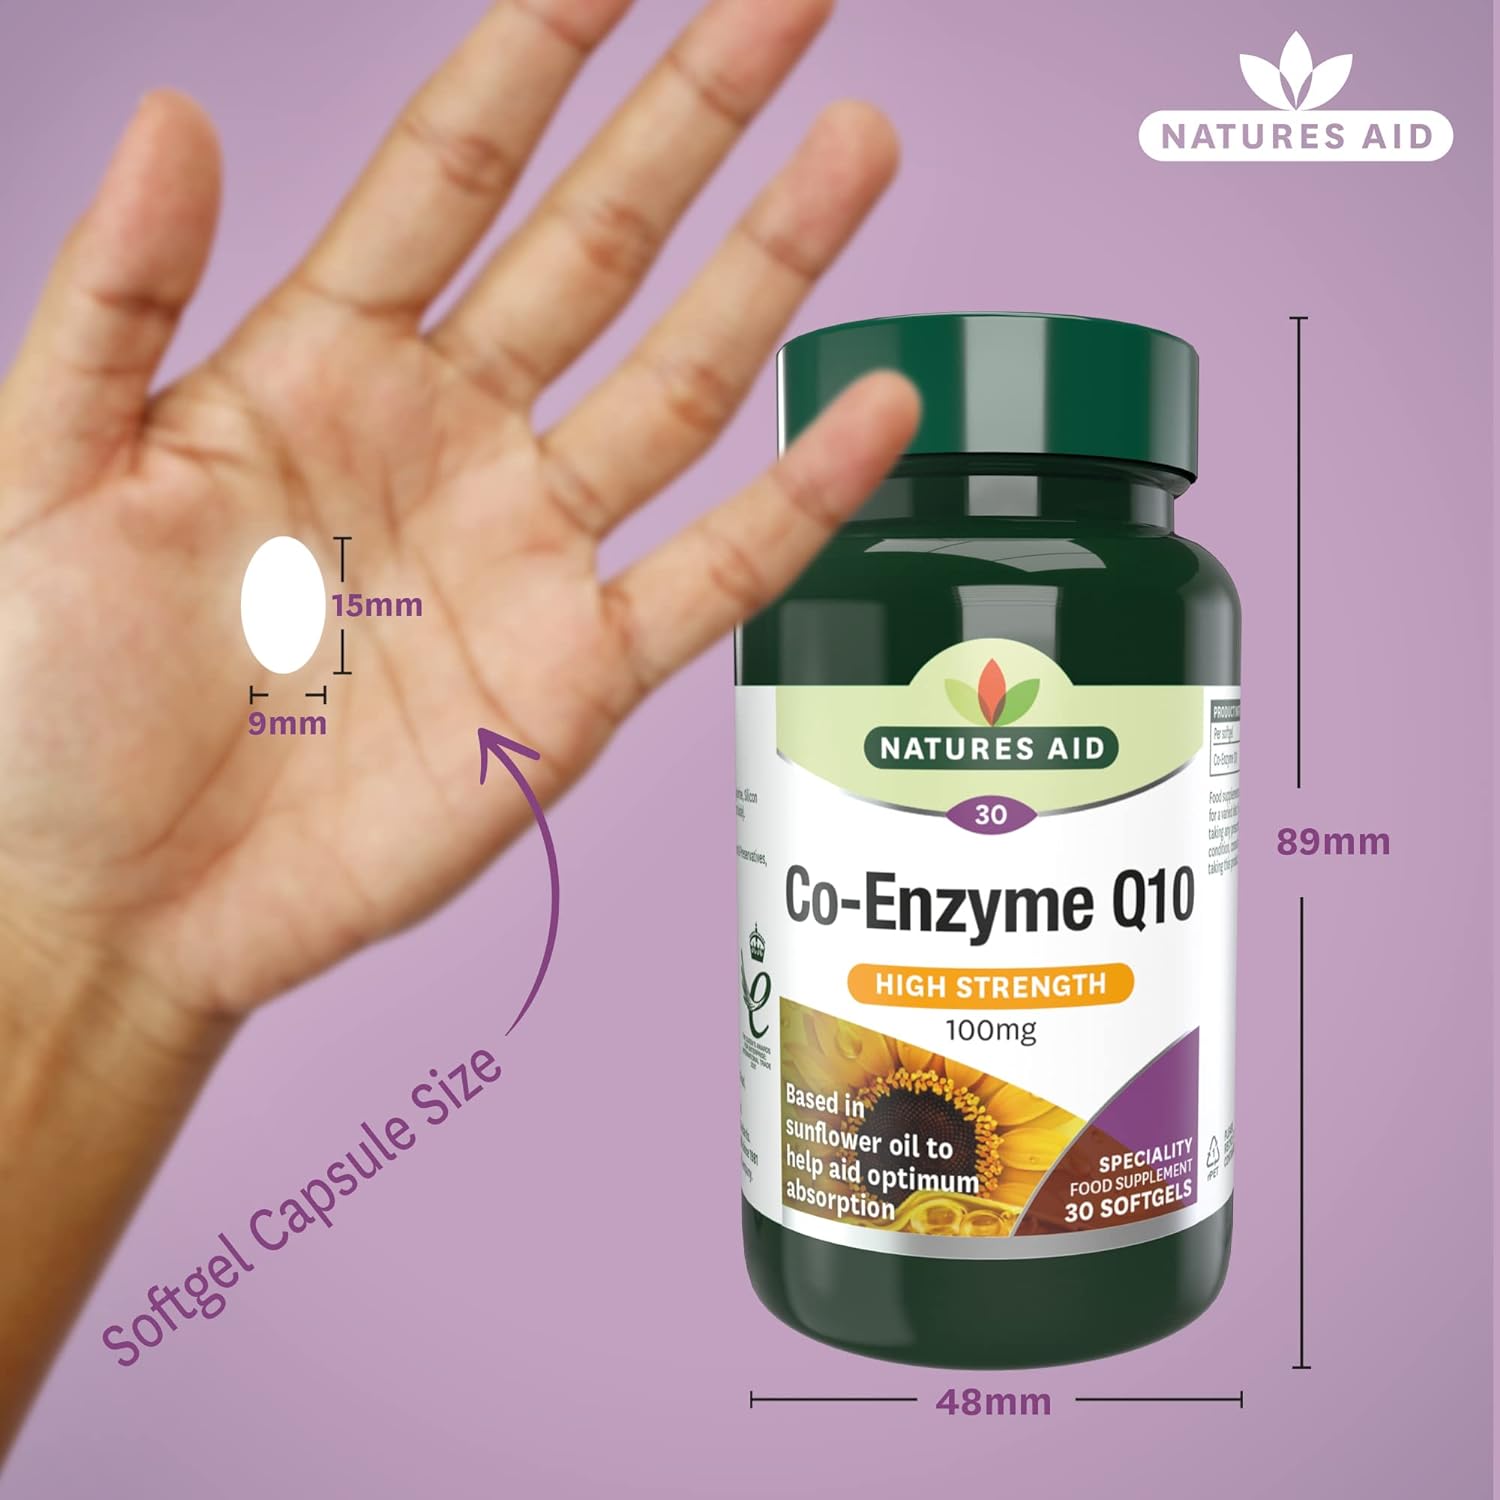 Co-Enzyme Q10 High Strength 100mg 30 Softgels